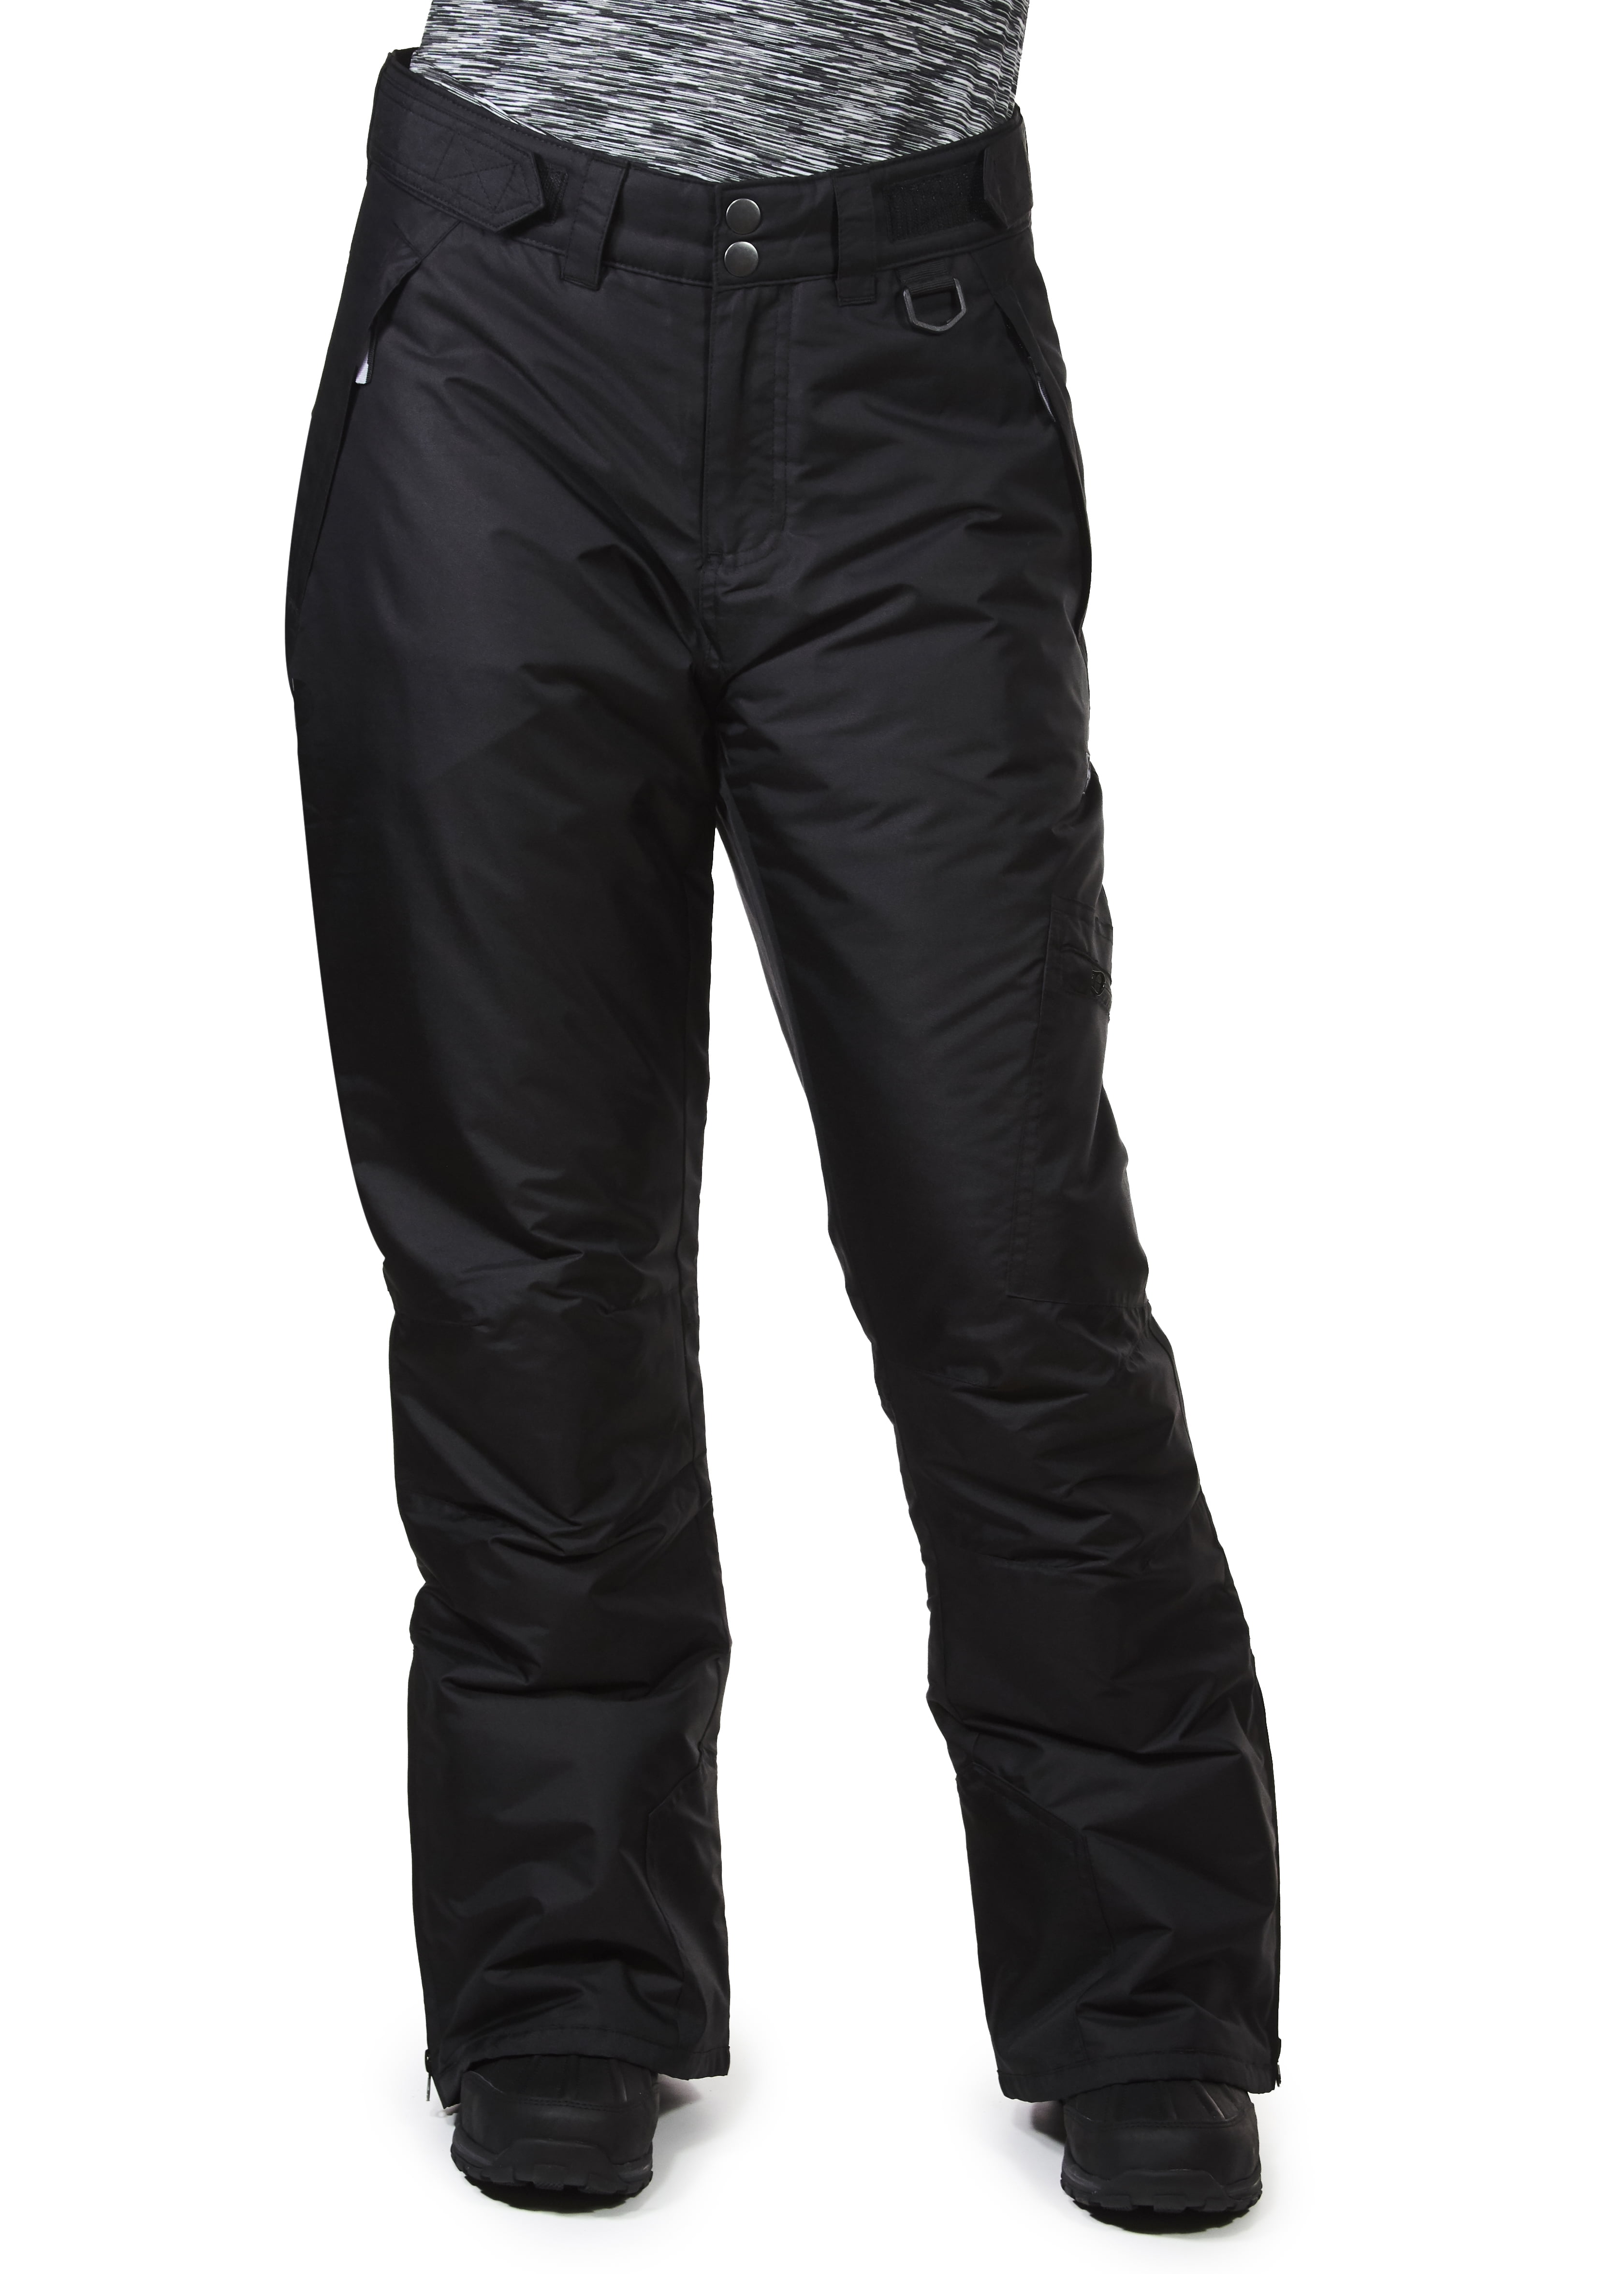 Arctic Quest Womens Insulated Ski & Snow Pants 